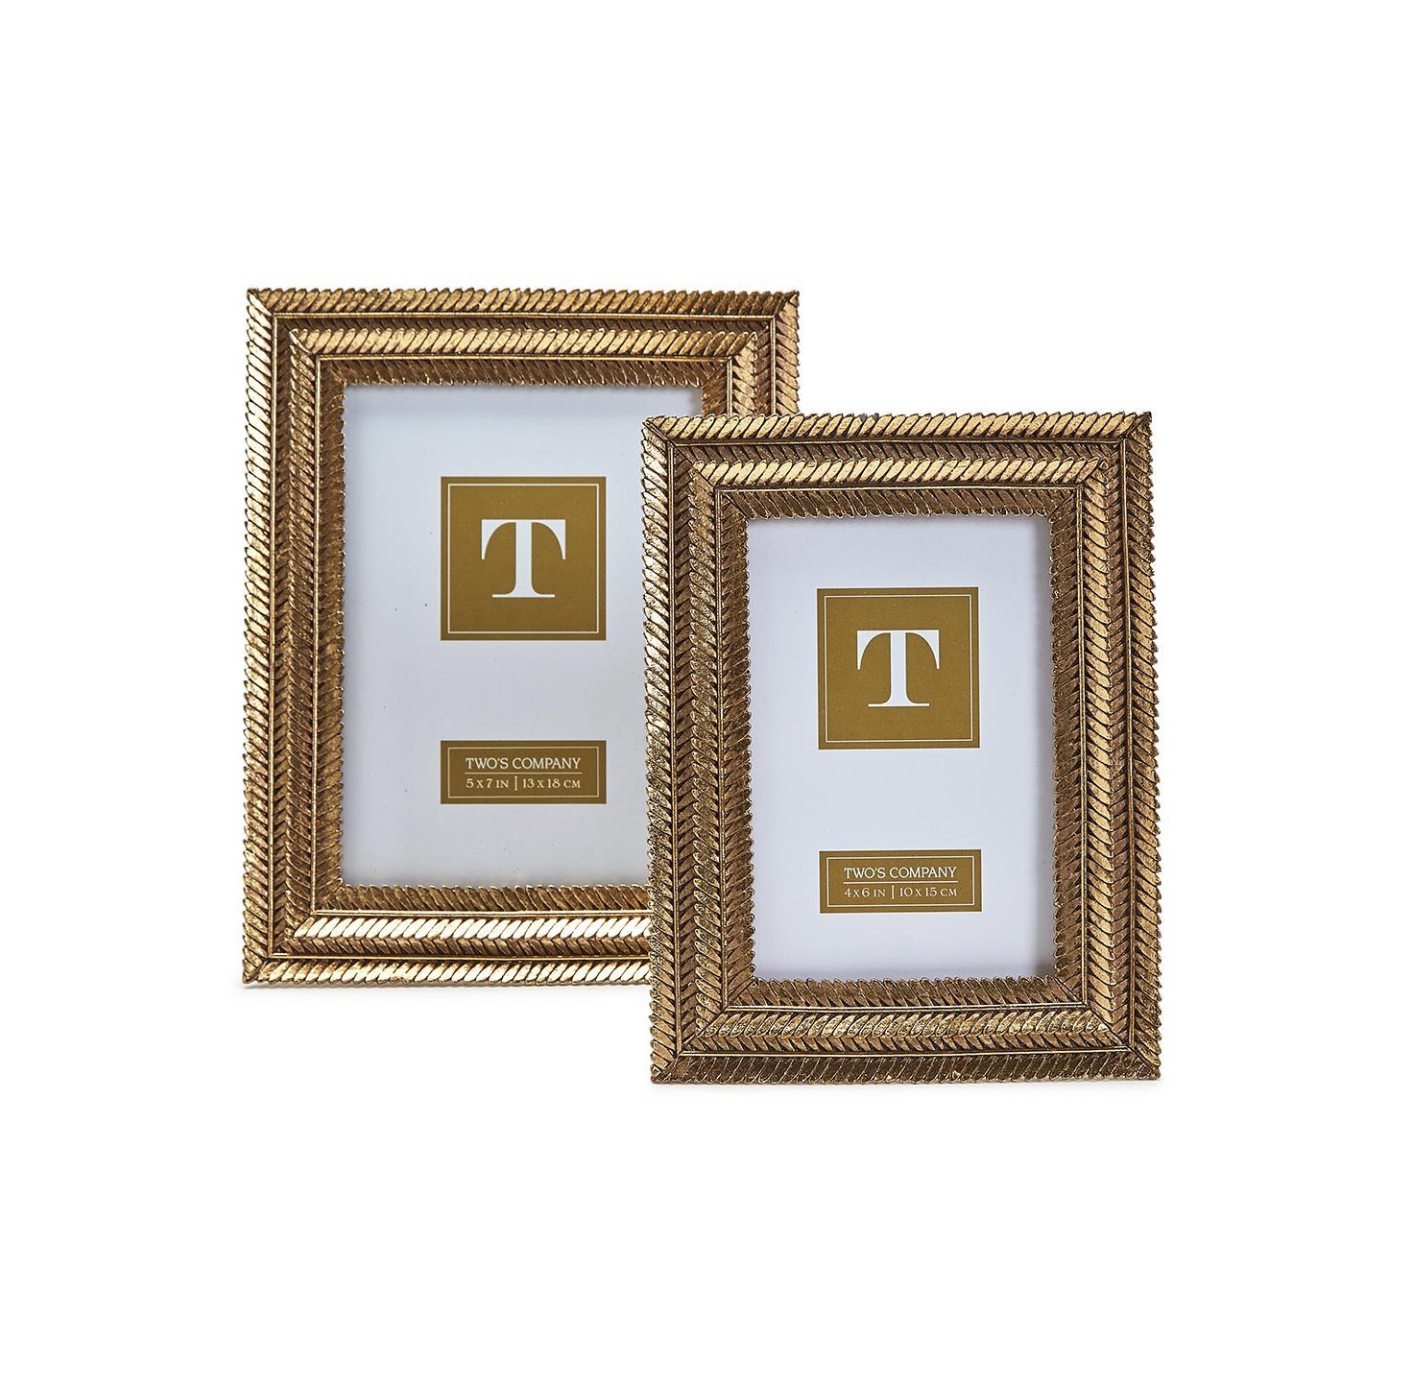 TWO'S COMPANY gold fern photo frames